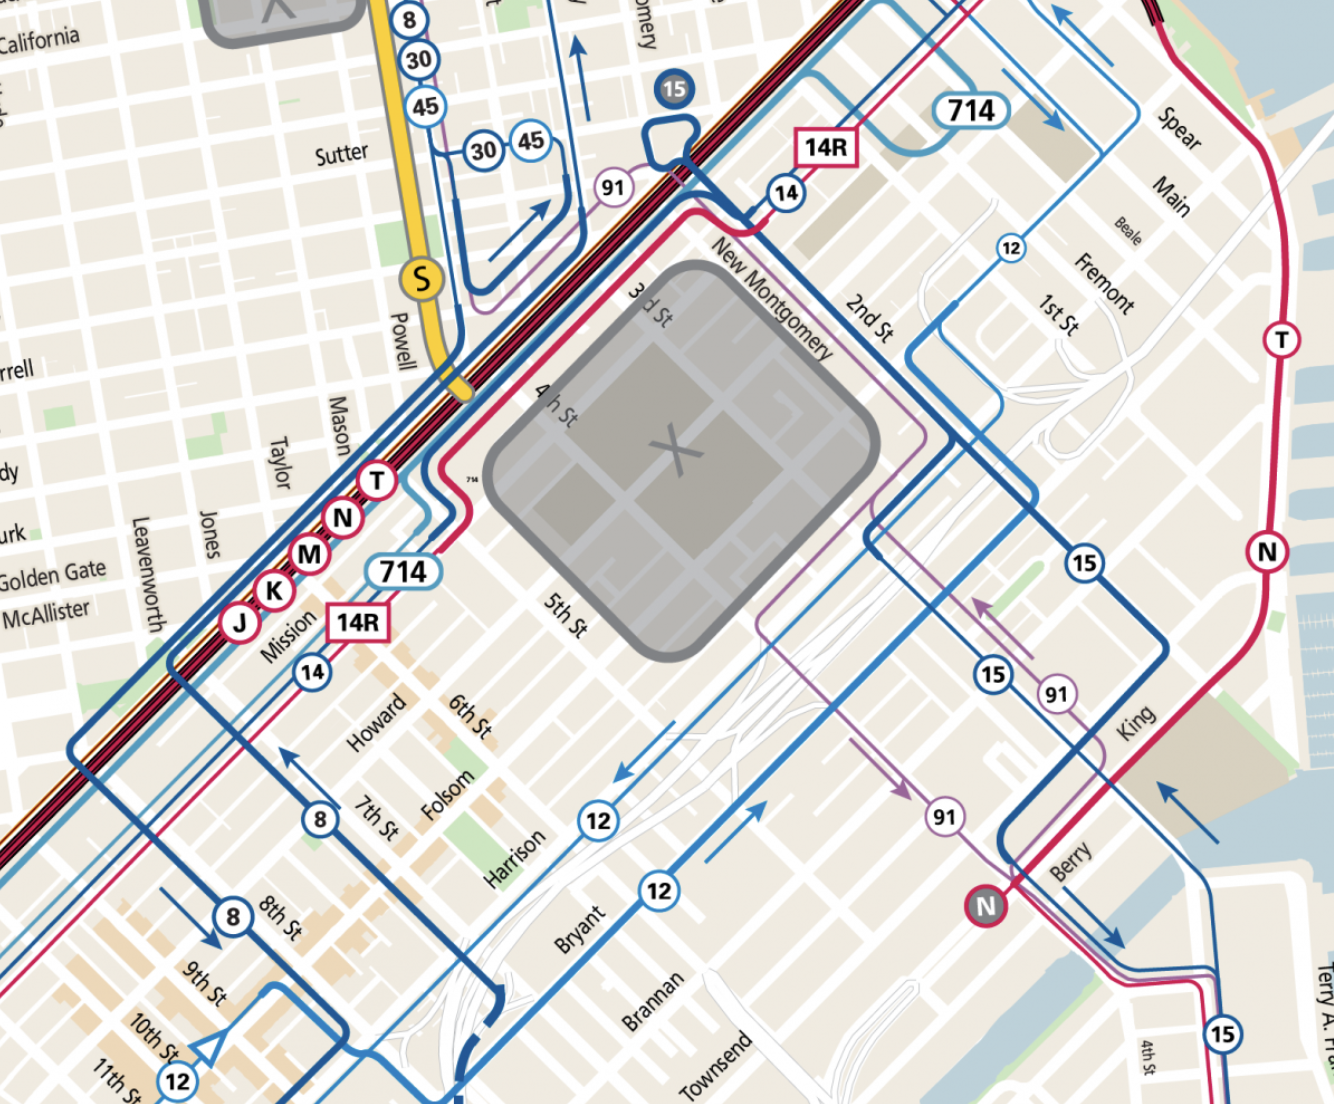 A map of downtown San Francisco's transit routes.